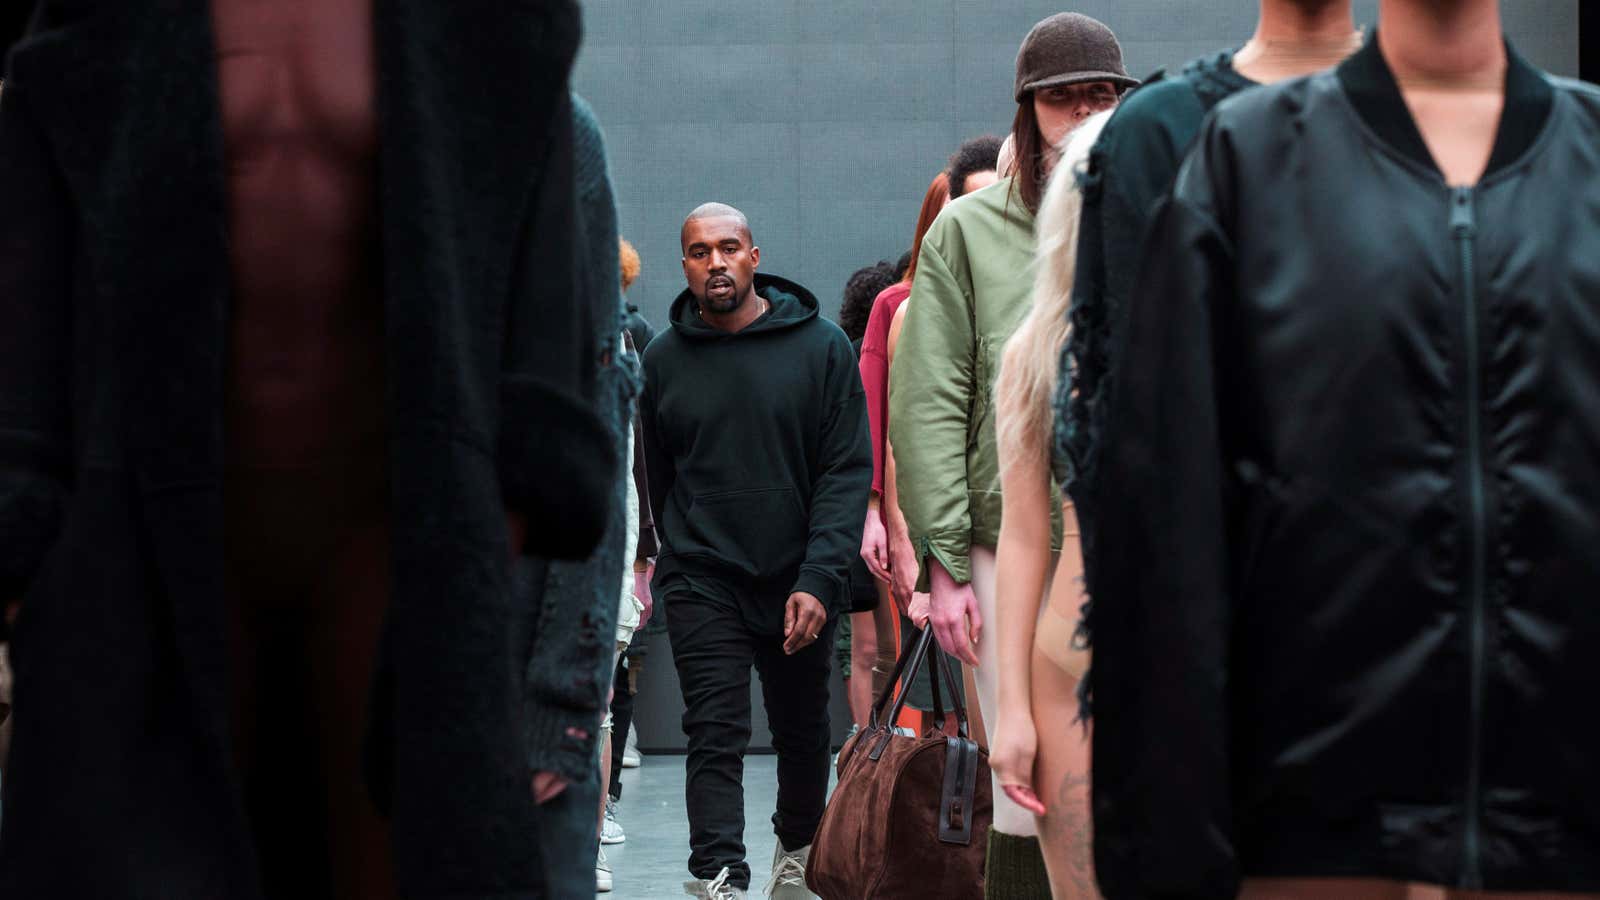 Kanye West fans are in a frenzy over his new clothing line.